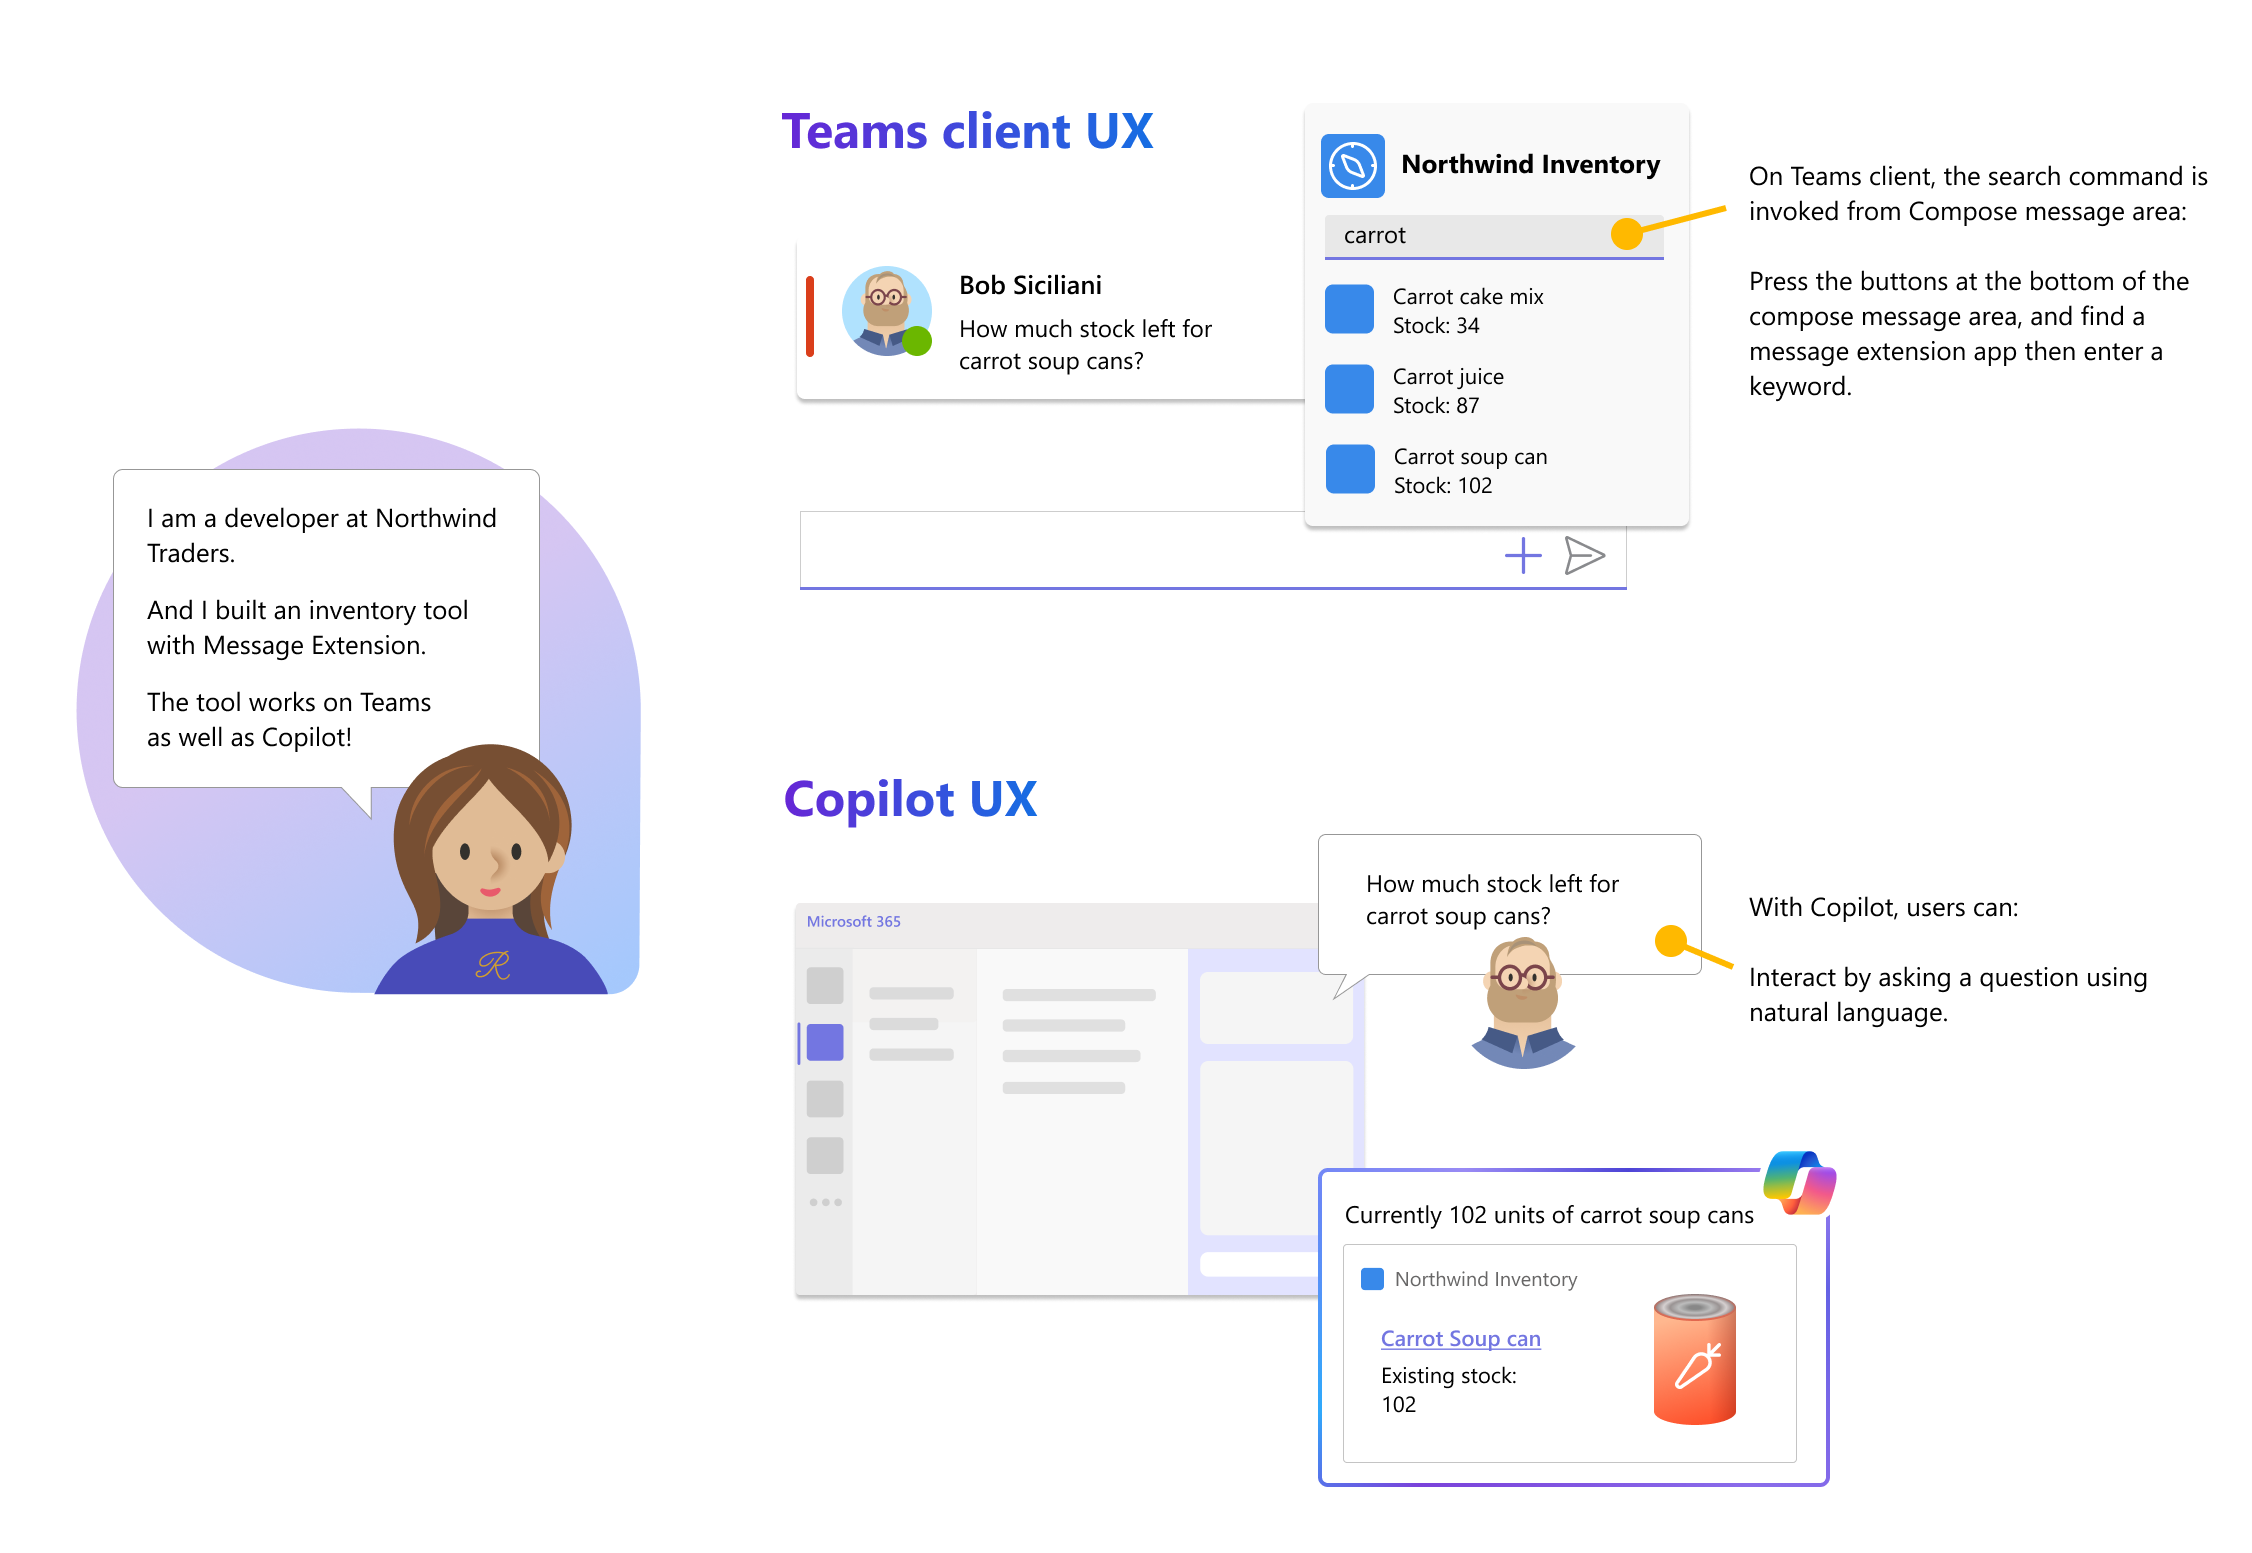 Graphic shows the user experience between Microsoft Teams and Copilot for Microsoft 365 (M365 Chat).